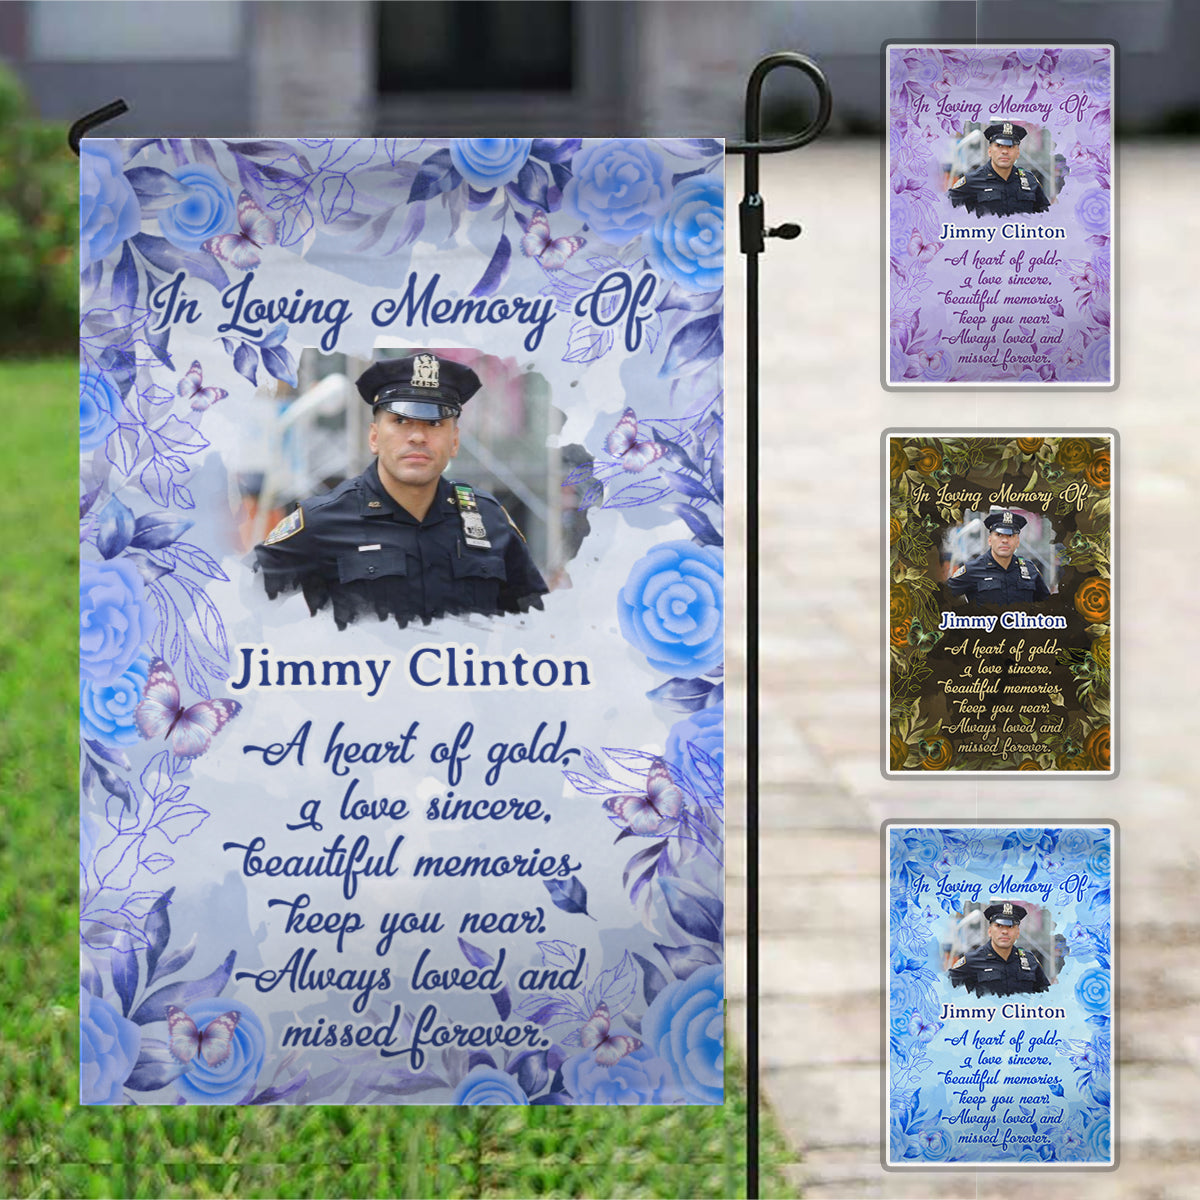 In Loving Memory Of Personalized Photo Memorial Garden & House Flag